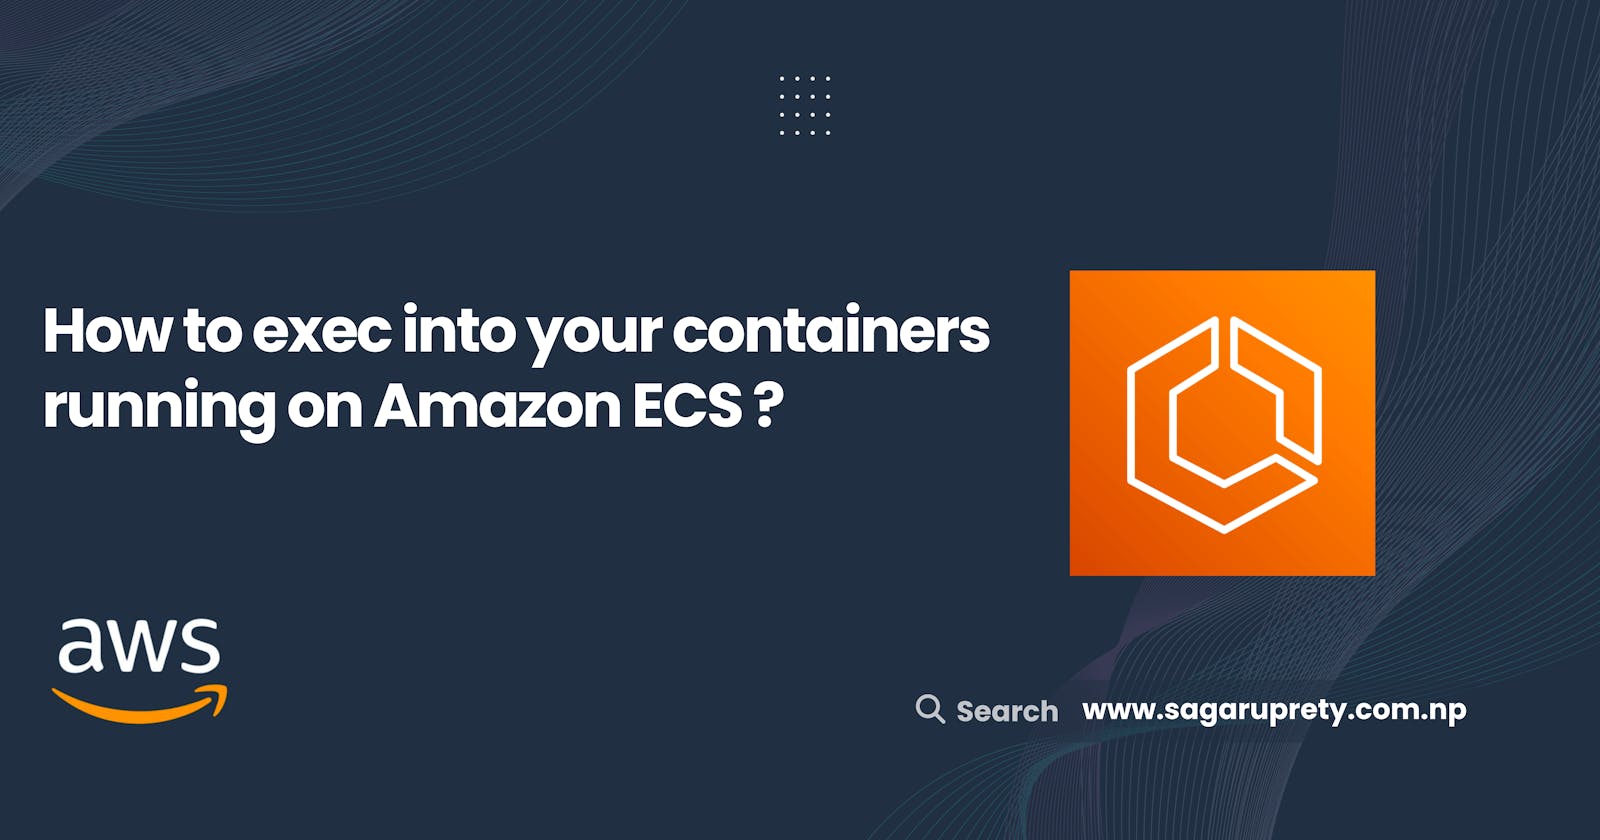 How to exec into your containers running on Amazon ECS